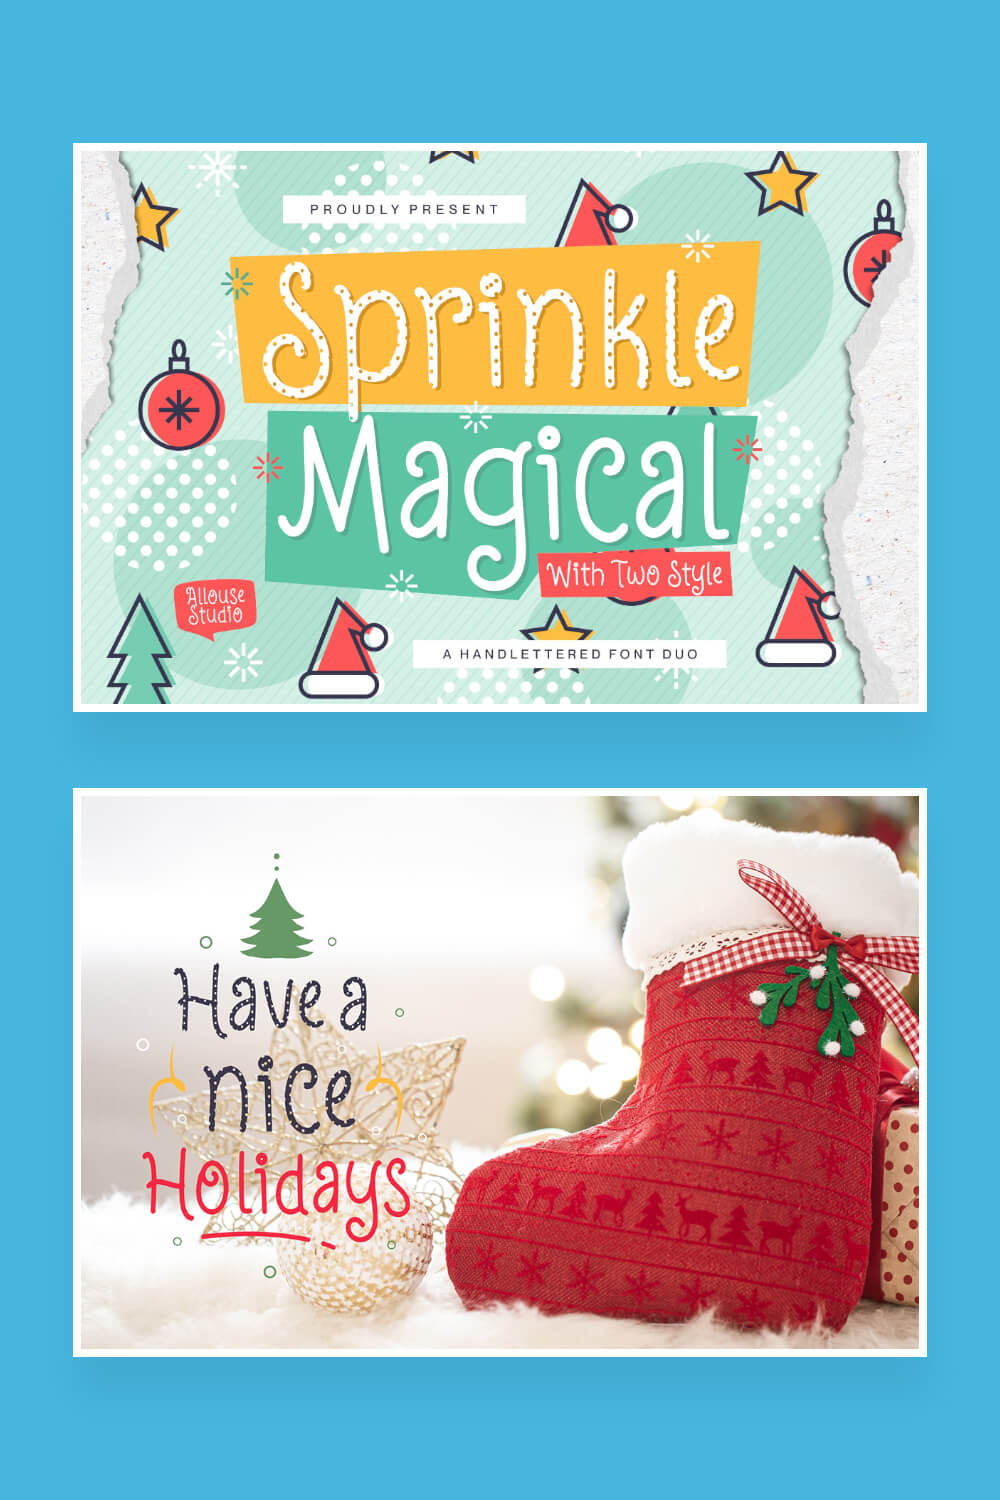 sprinkle magical two styles handwritten font pinterest image.